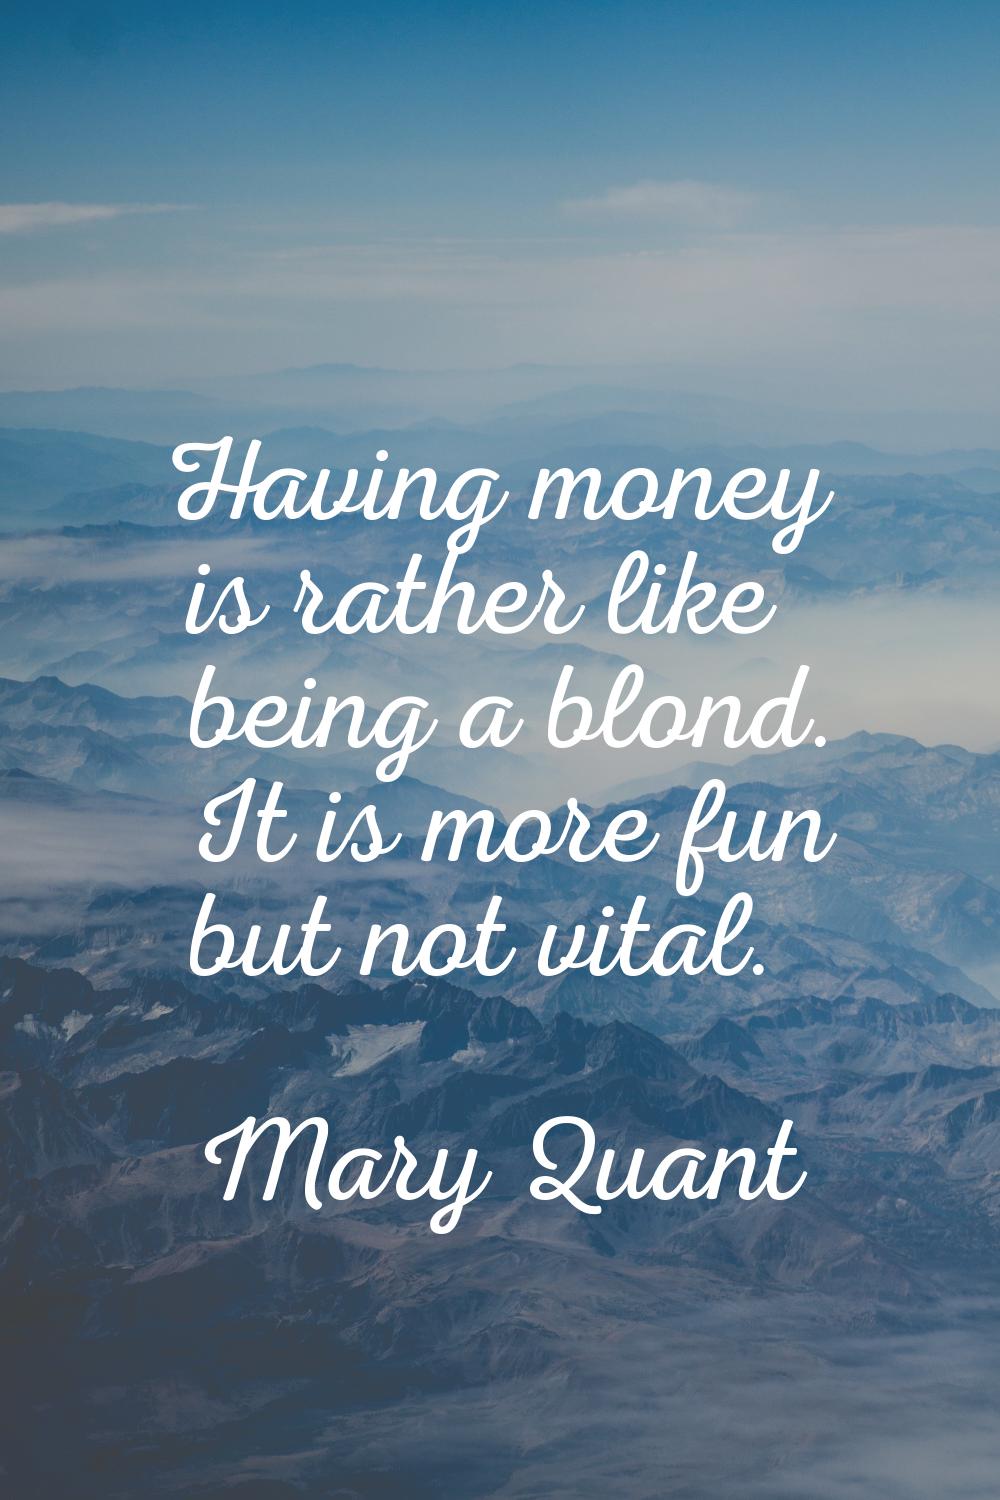 Having money is rather like being a blond. It is more fun but not vital.